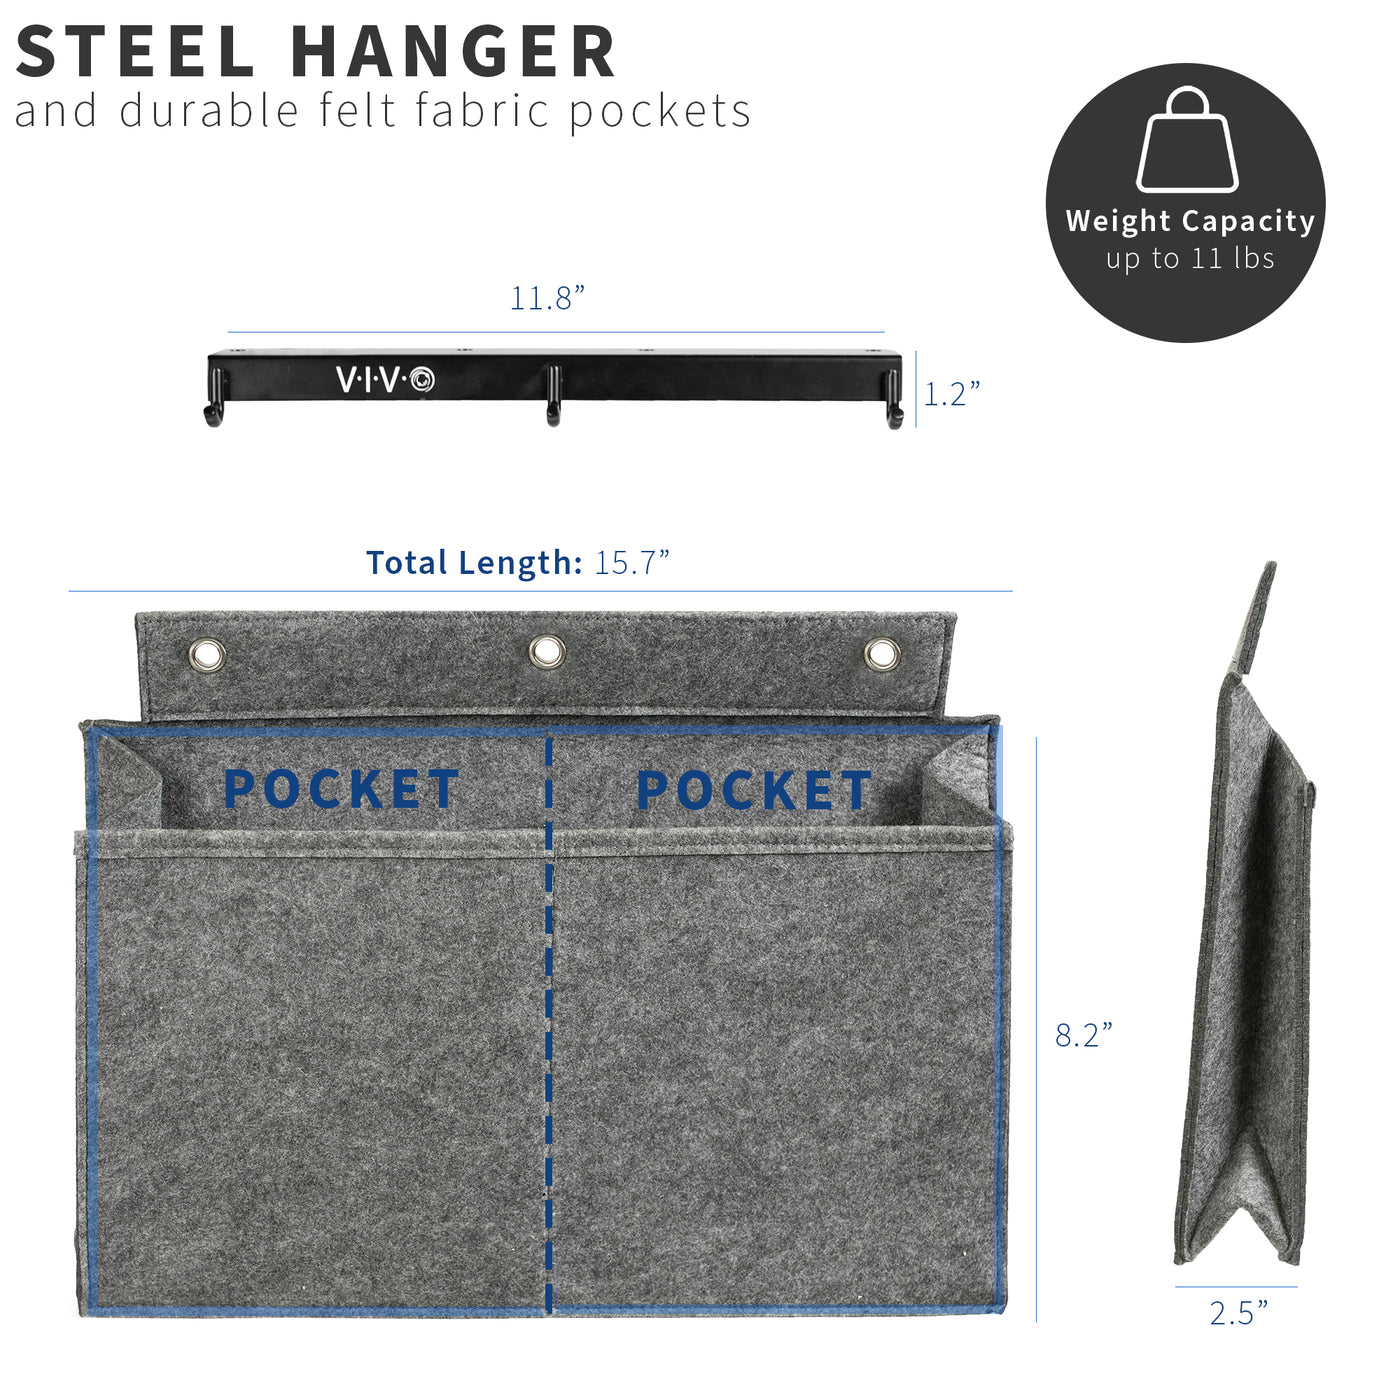 Durable dual pocket divider and sturdy steel hanger to support desk items. 